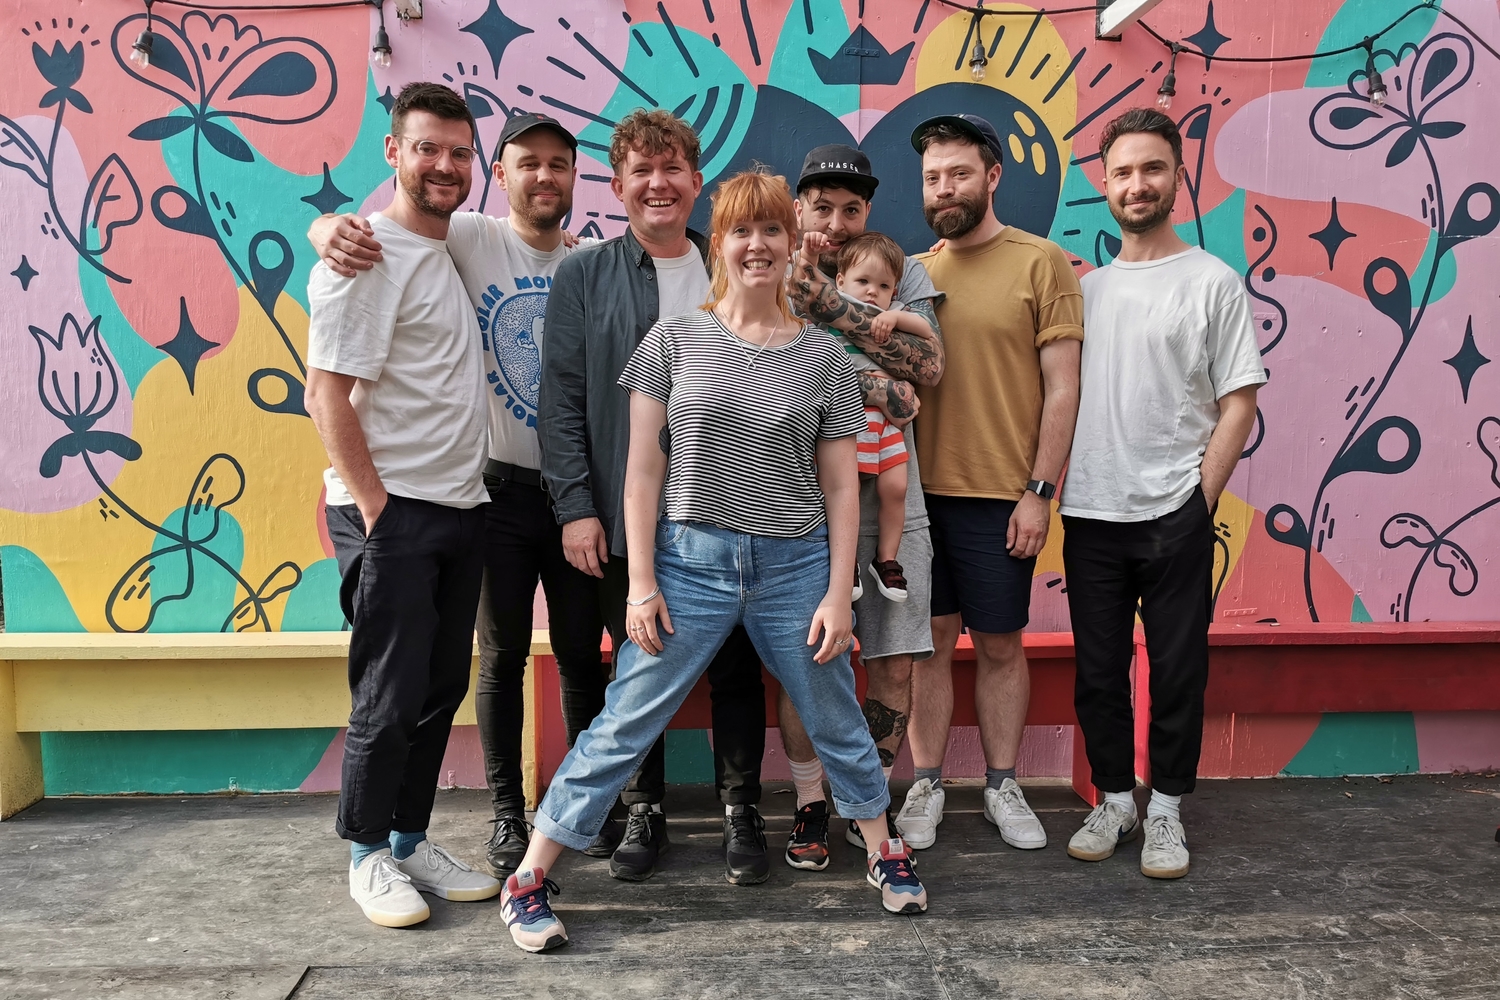 Los Campesinos! announce ‘Romance Is Boring’ reissue to celebrate 10th anniversary